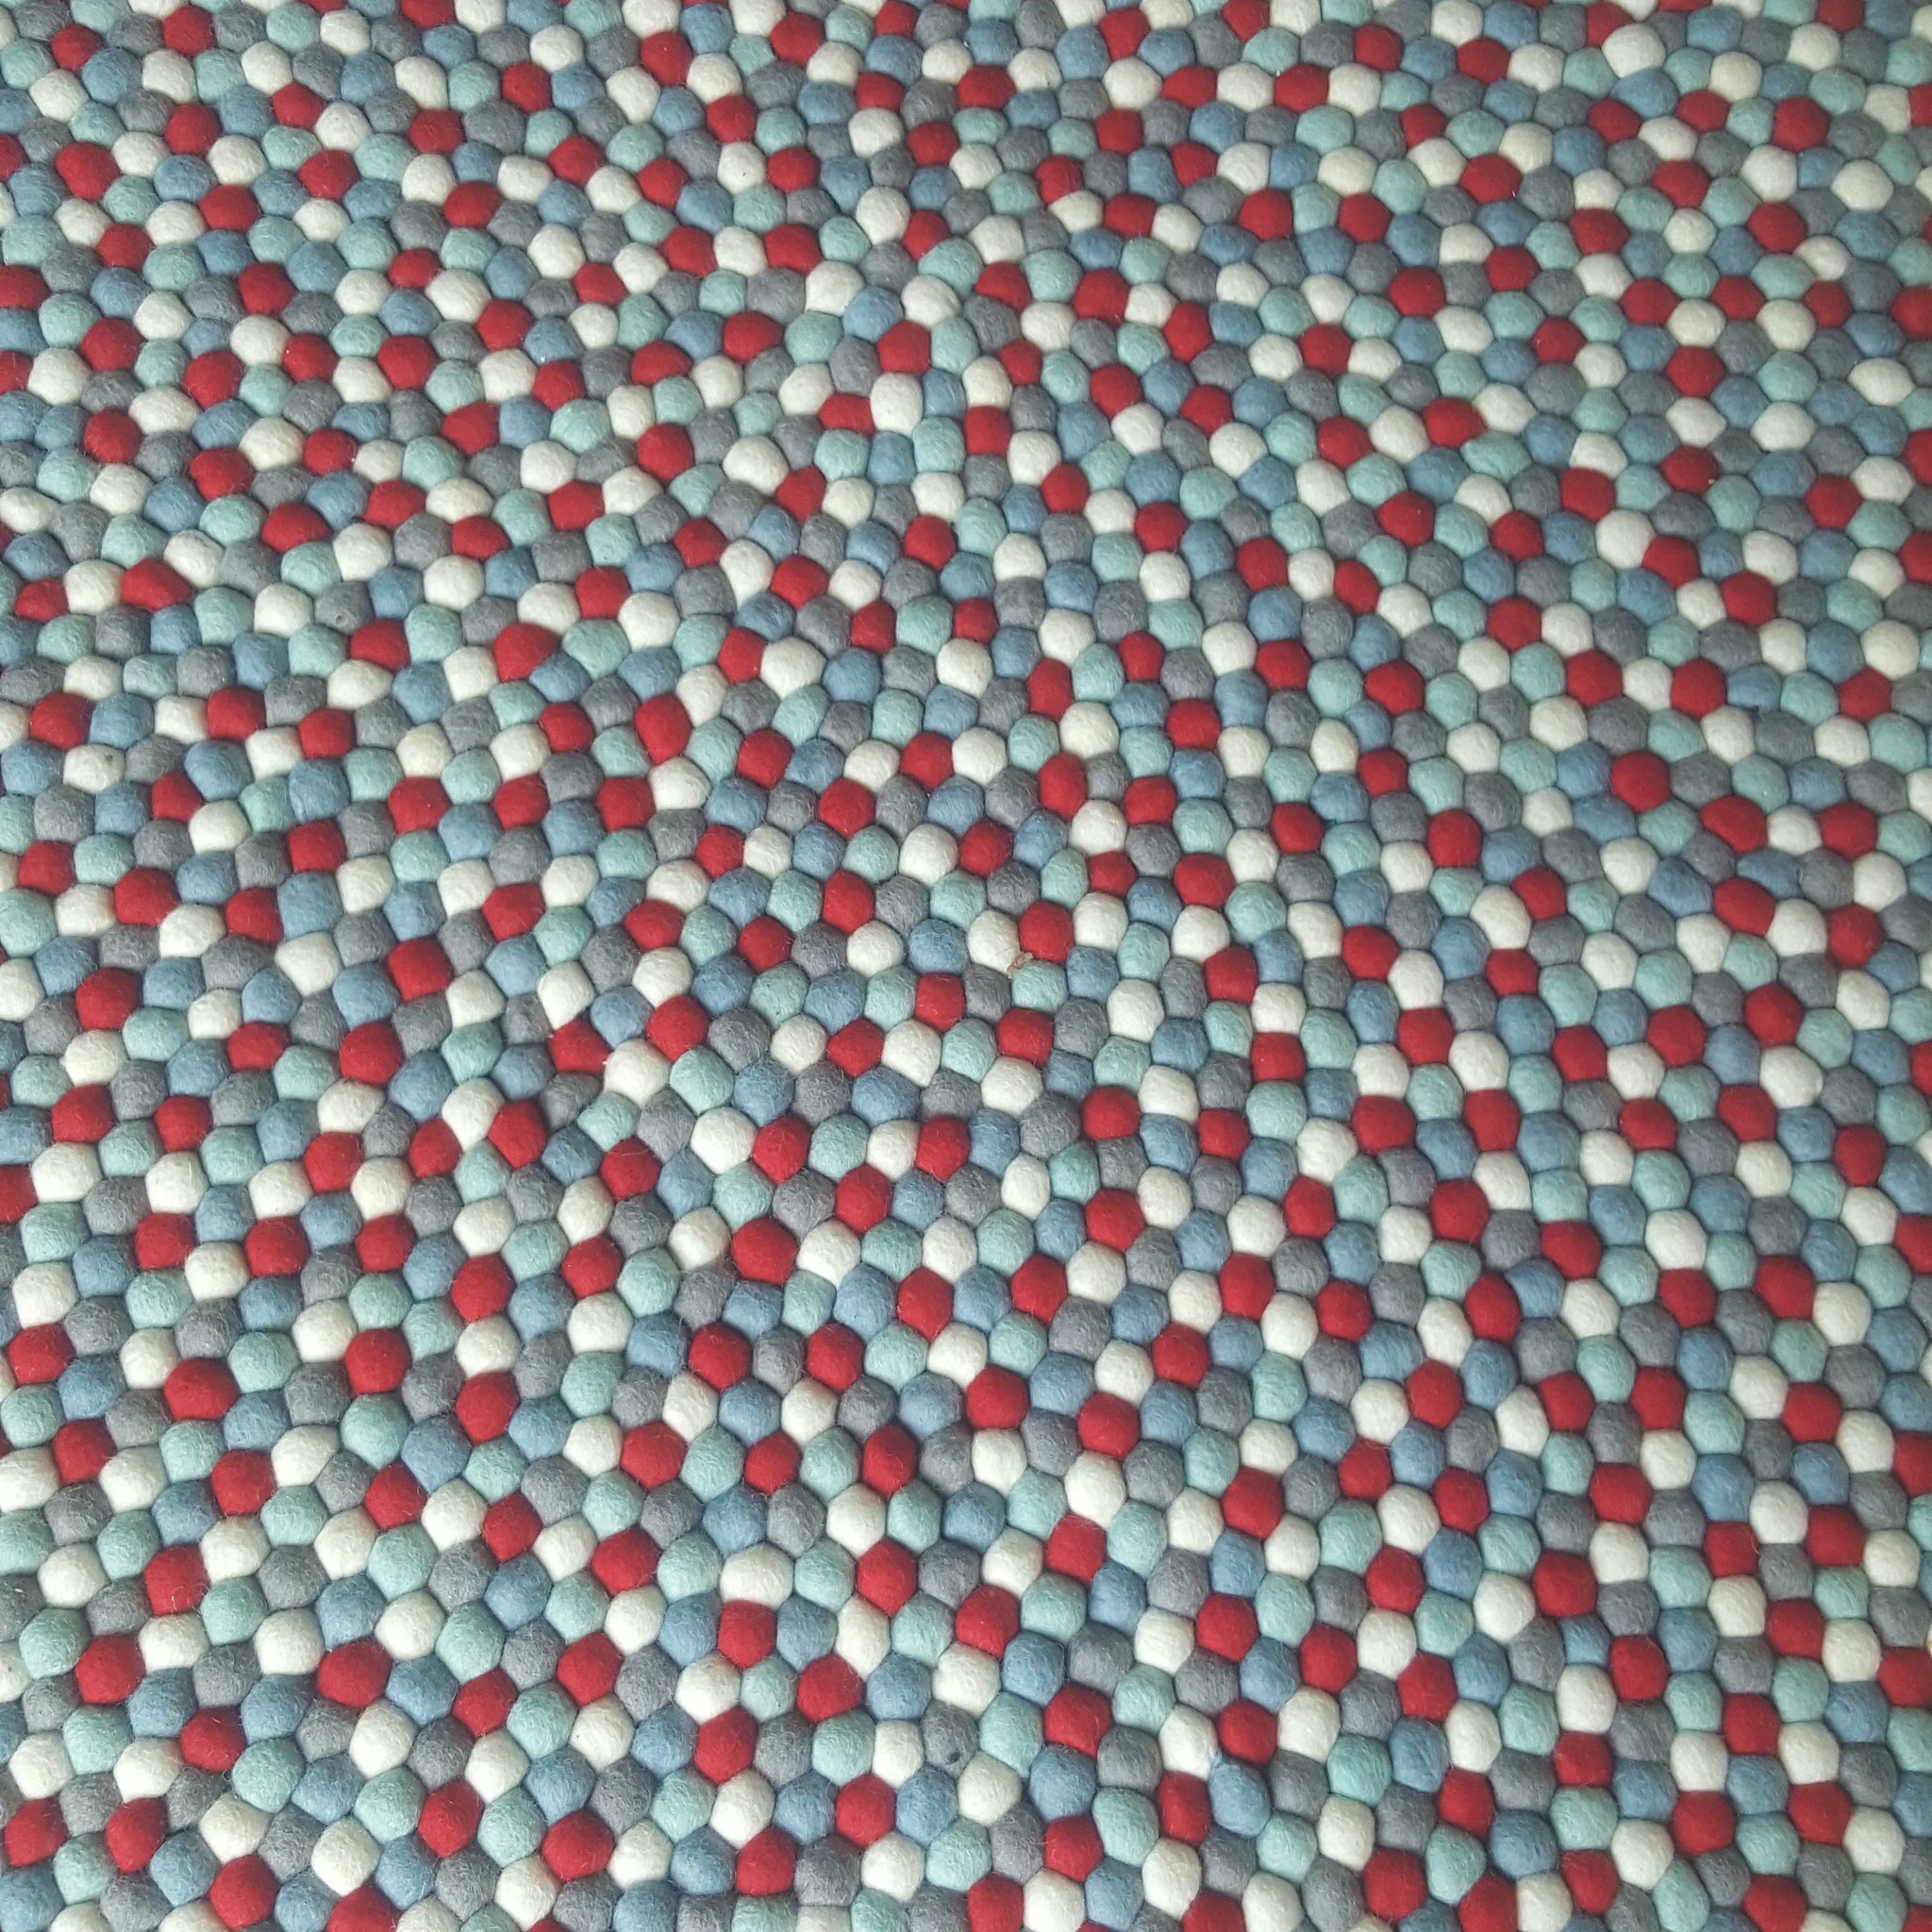 Felt Ball Rug- The Red Comet